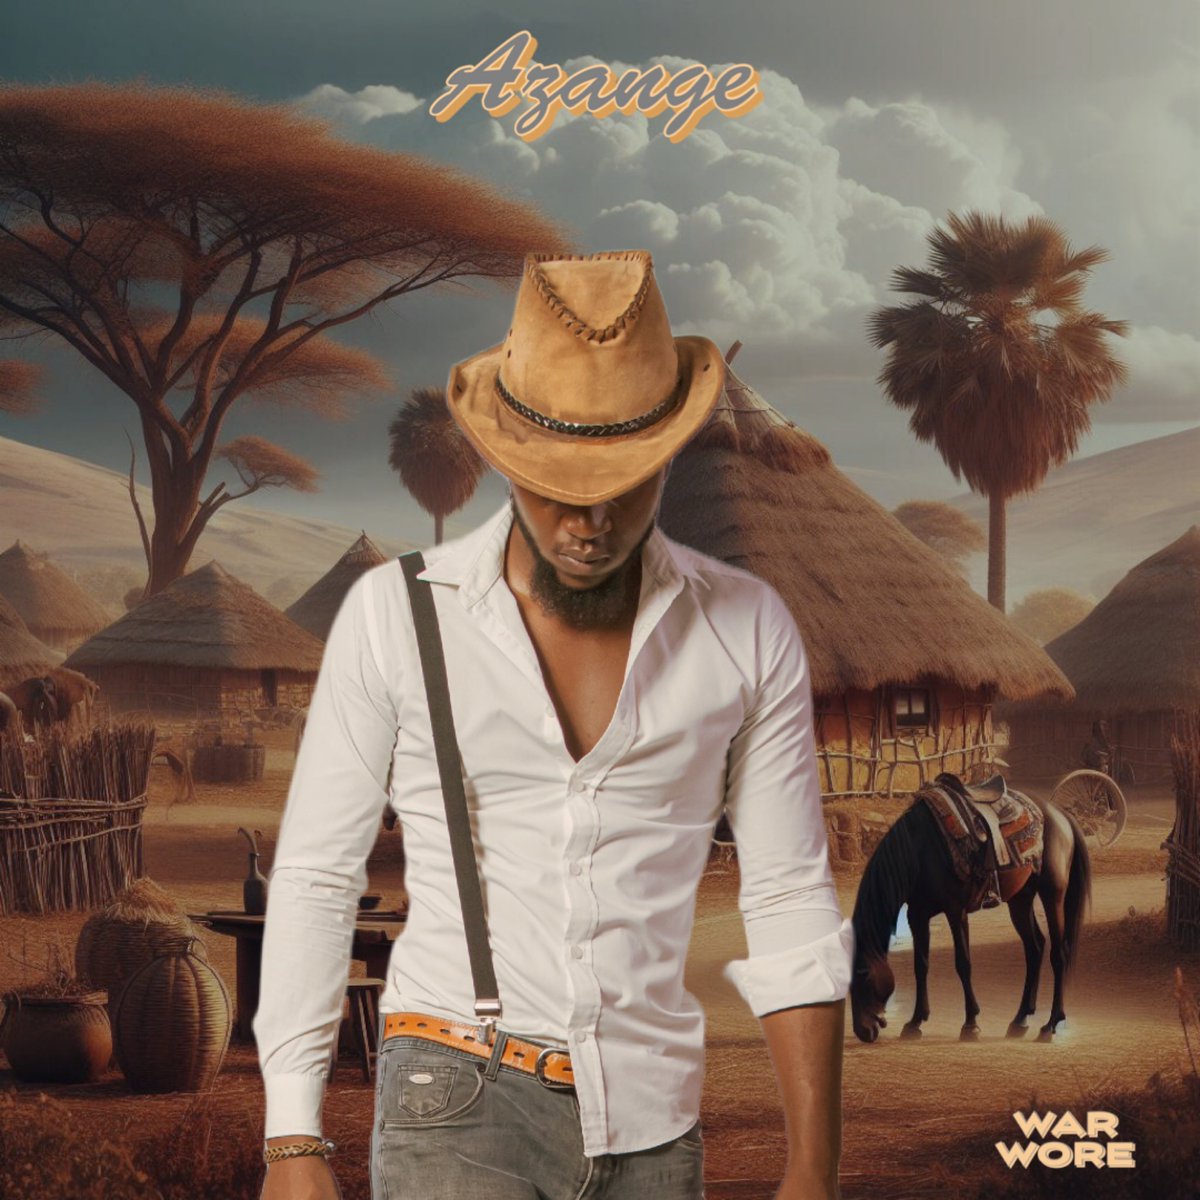 'Azange', a sonic expression from War Wore @war_wore, inspired by the exhilarating experience of discovering new love ... captures the essesnce of celebration and joy. | #AfroPop #Afrobeats #Dance | one.ubuntu.fm/2FNIojN | #UbuntuFM #HipHop #Radio |